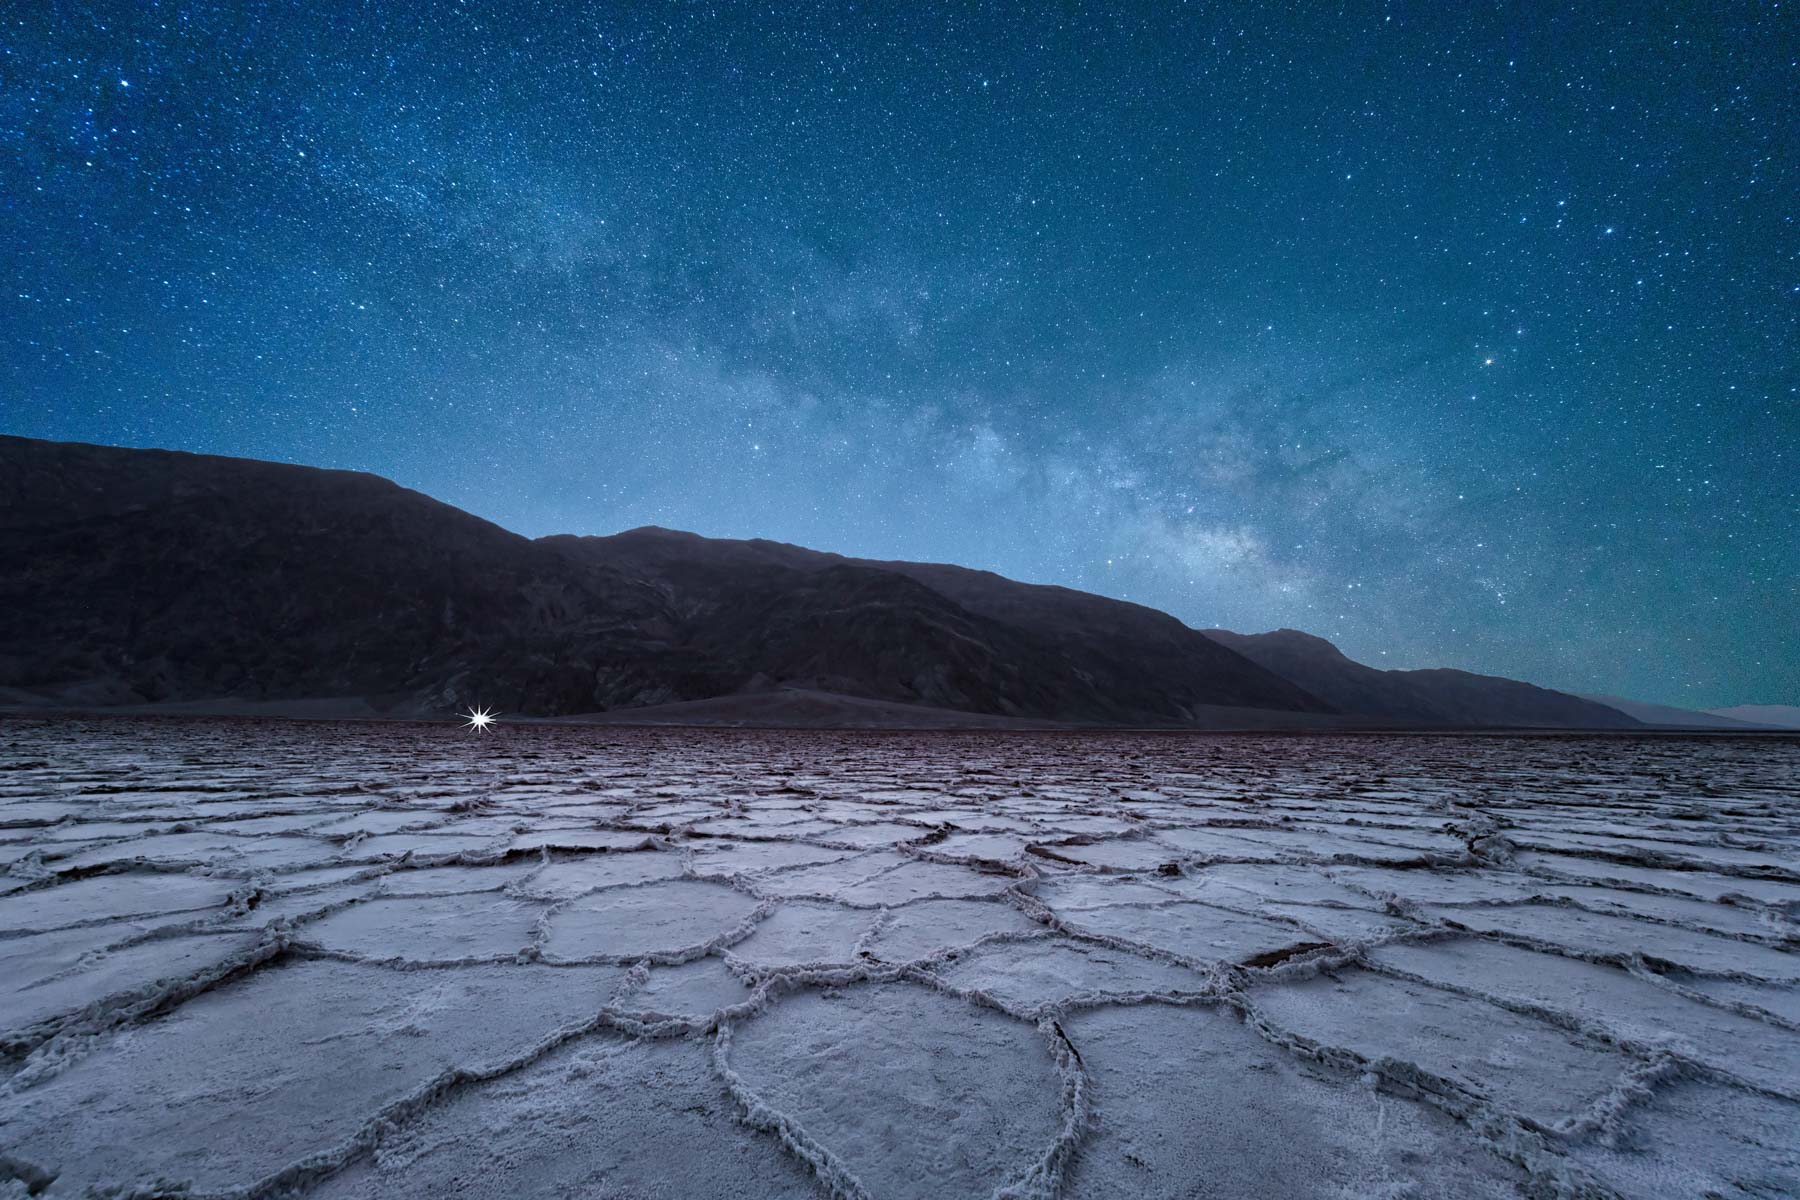 The Milky Way rising over the Badwater Salt Flats in Death Valley National Park, California